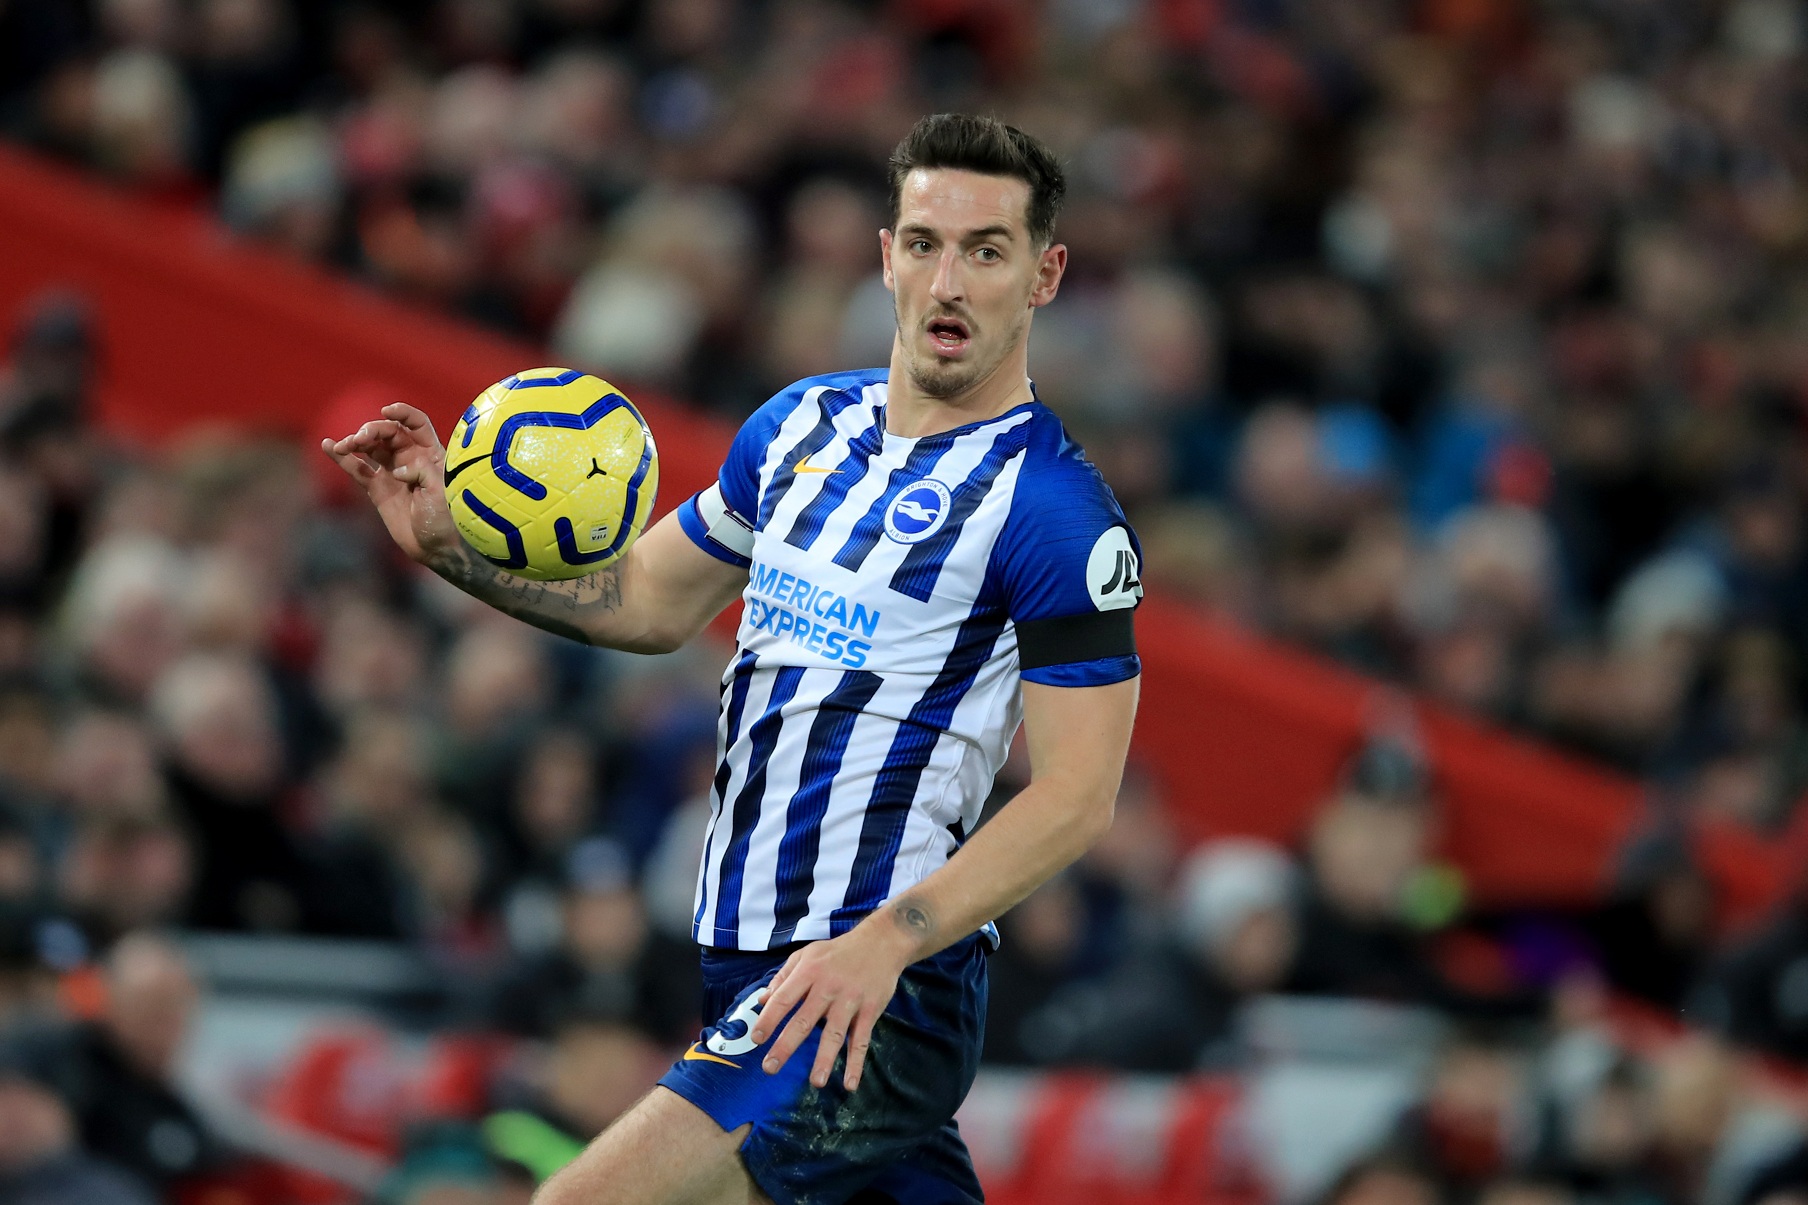 Lewis Dunk has been a consistent performer for Brighton (Getty Images)